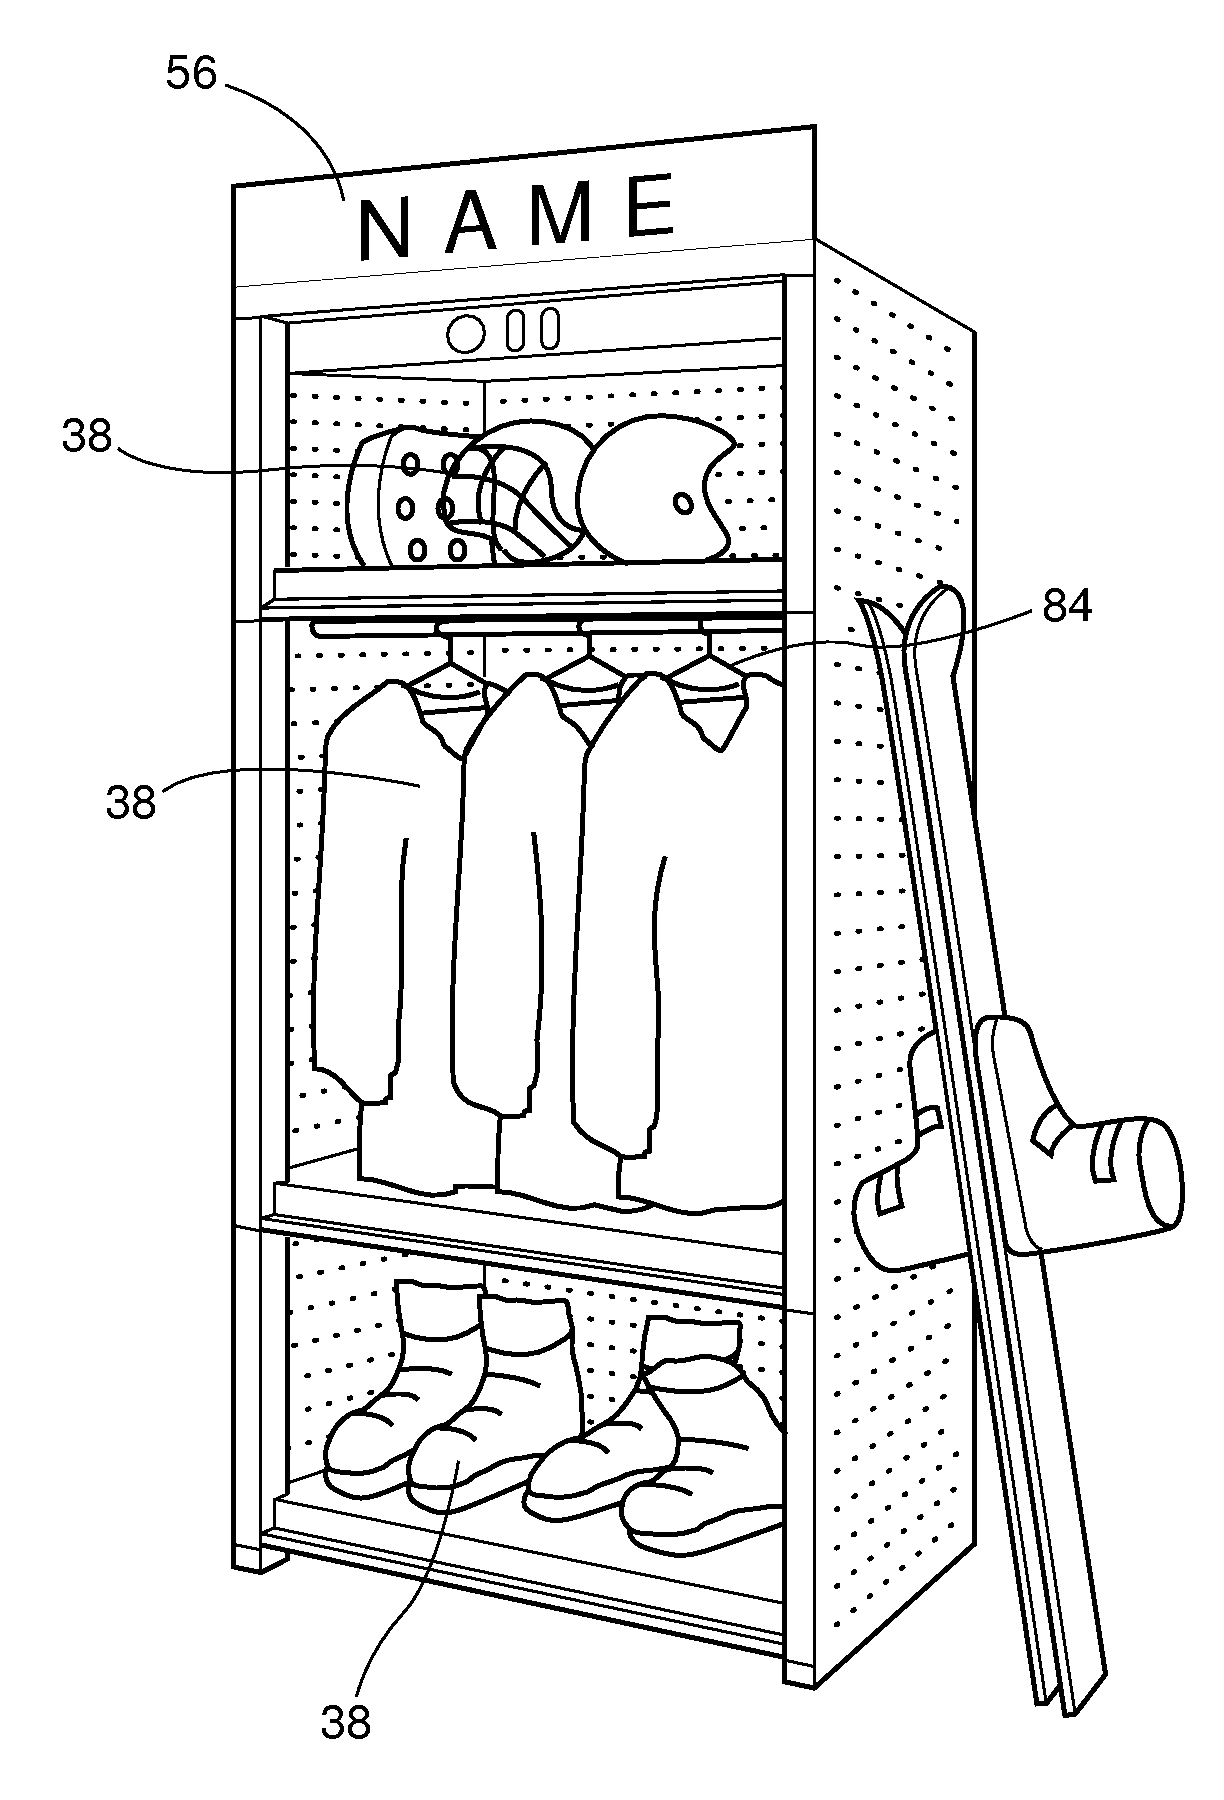 Storage and Drying Unit for Storing and Drying Outerwear, Sports Clothing and Equipment